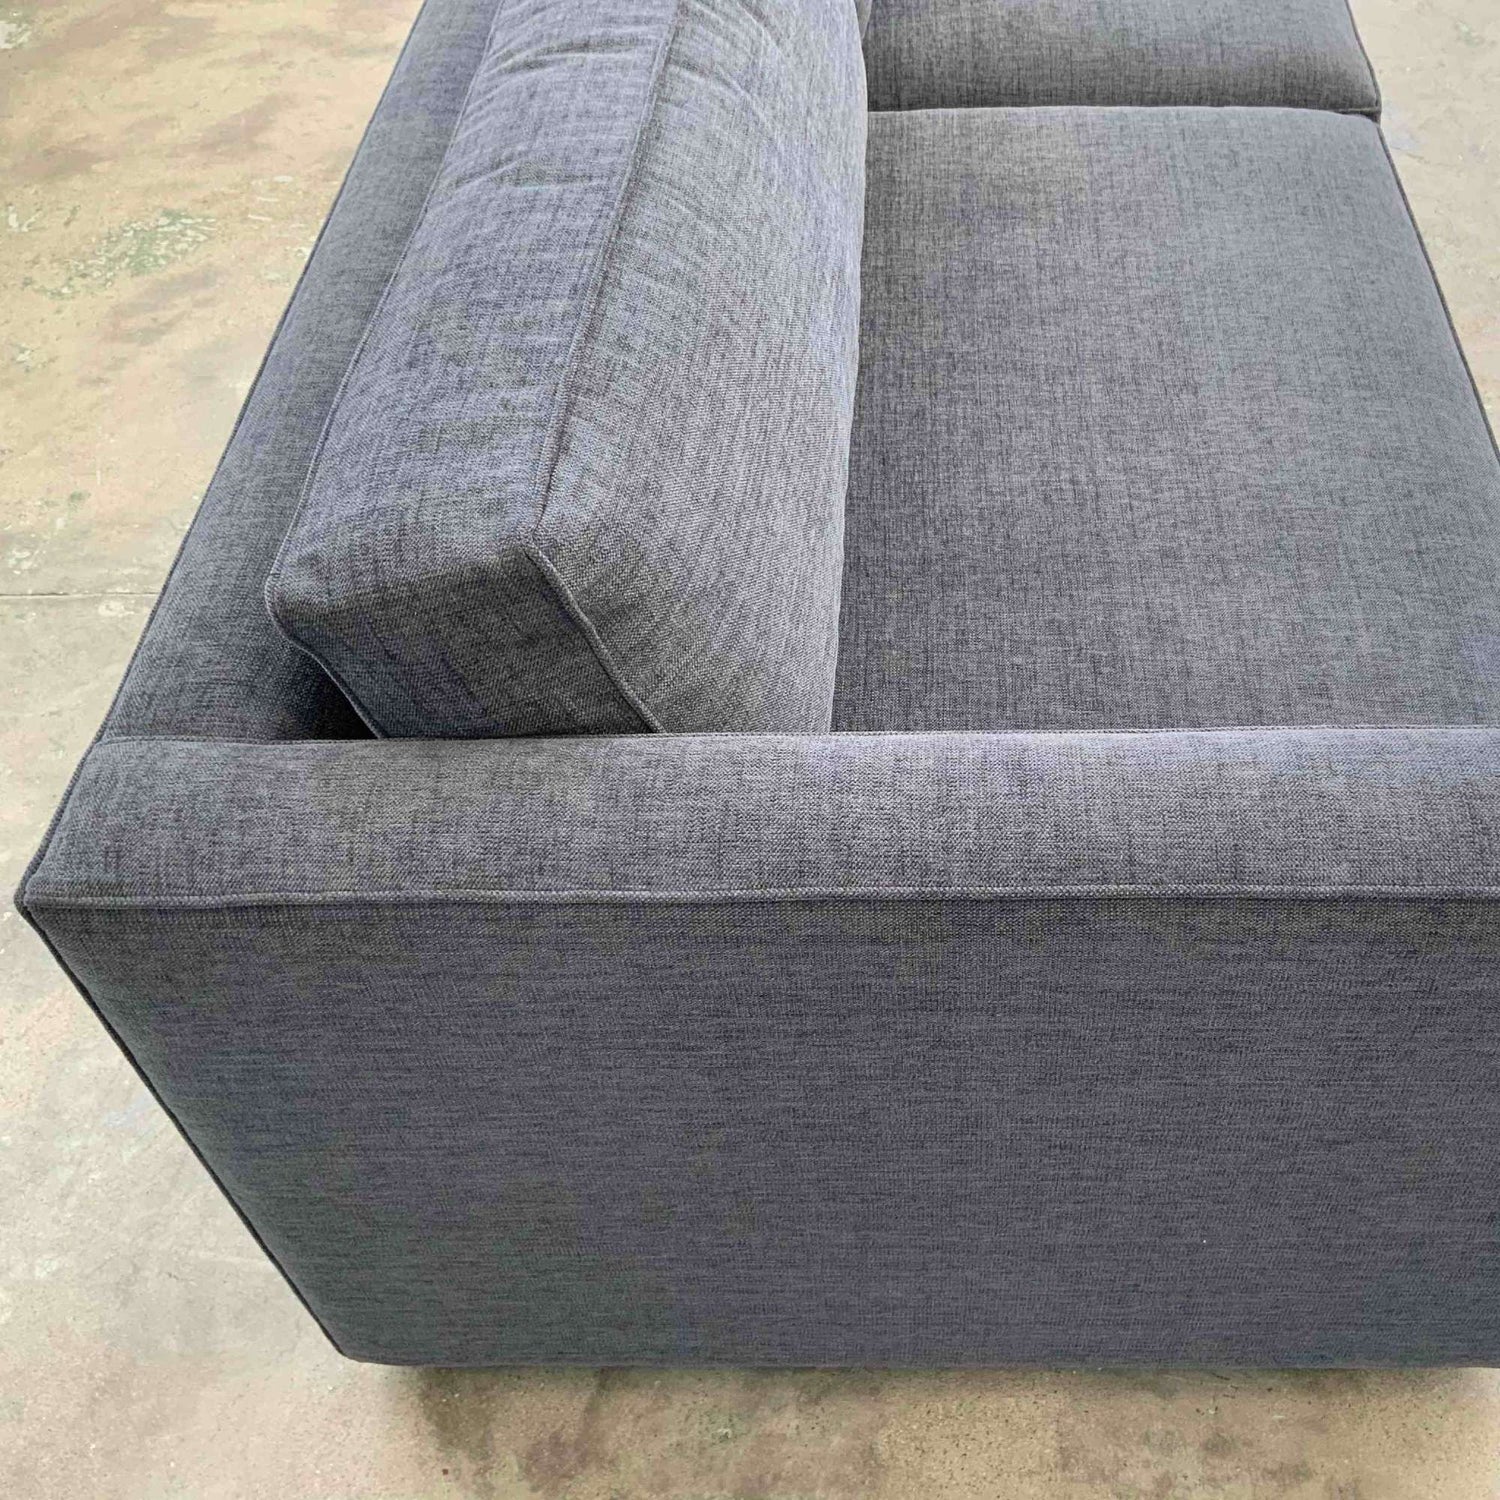 Newport Sofa | Value Range Fabrics Multiple Sizes And Options Available Made To Order In Wa